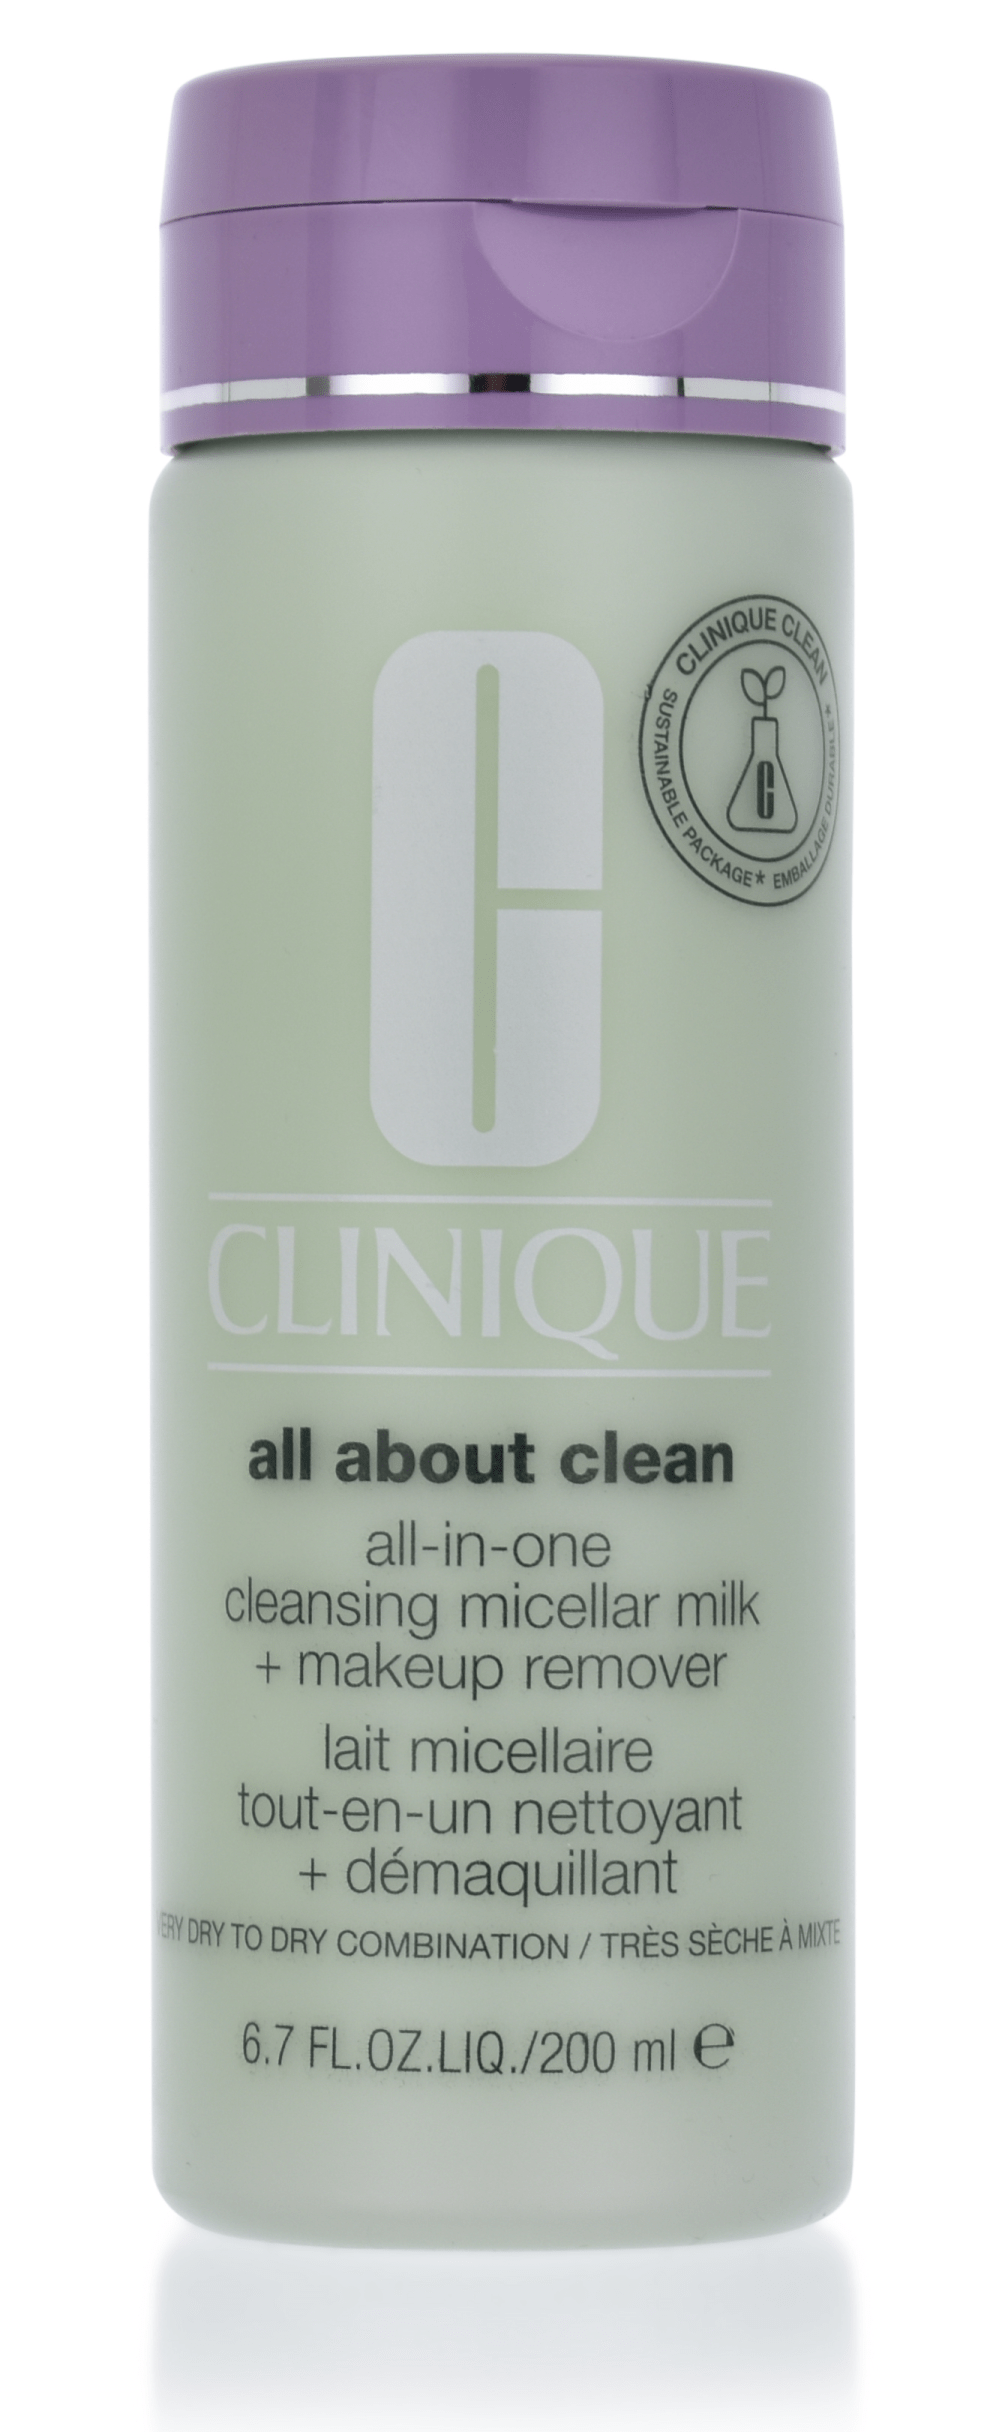 Clinique All ABOUT Clean All in One Cleansing Micellar Milk + Makeup Remover 200ml very dry to dry